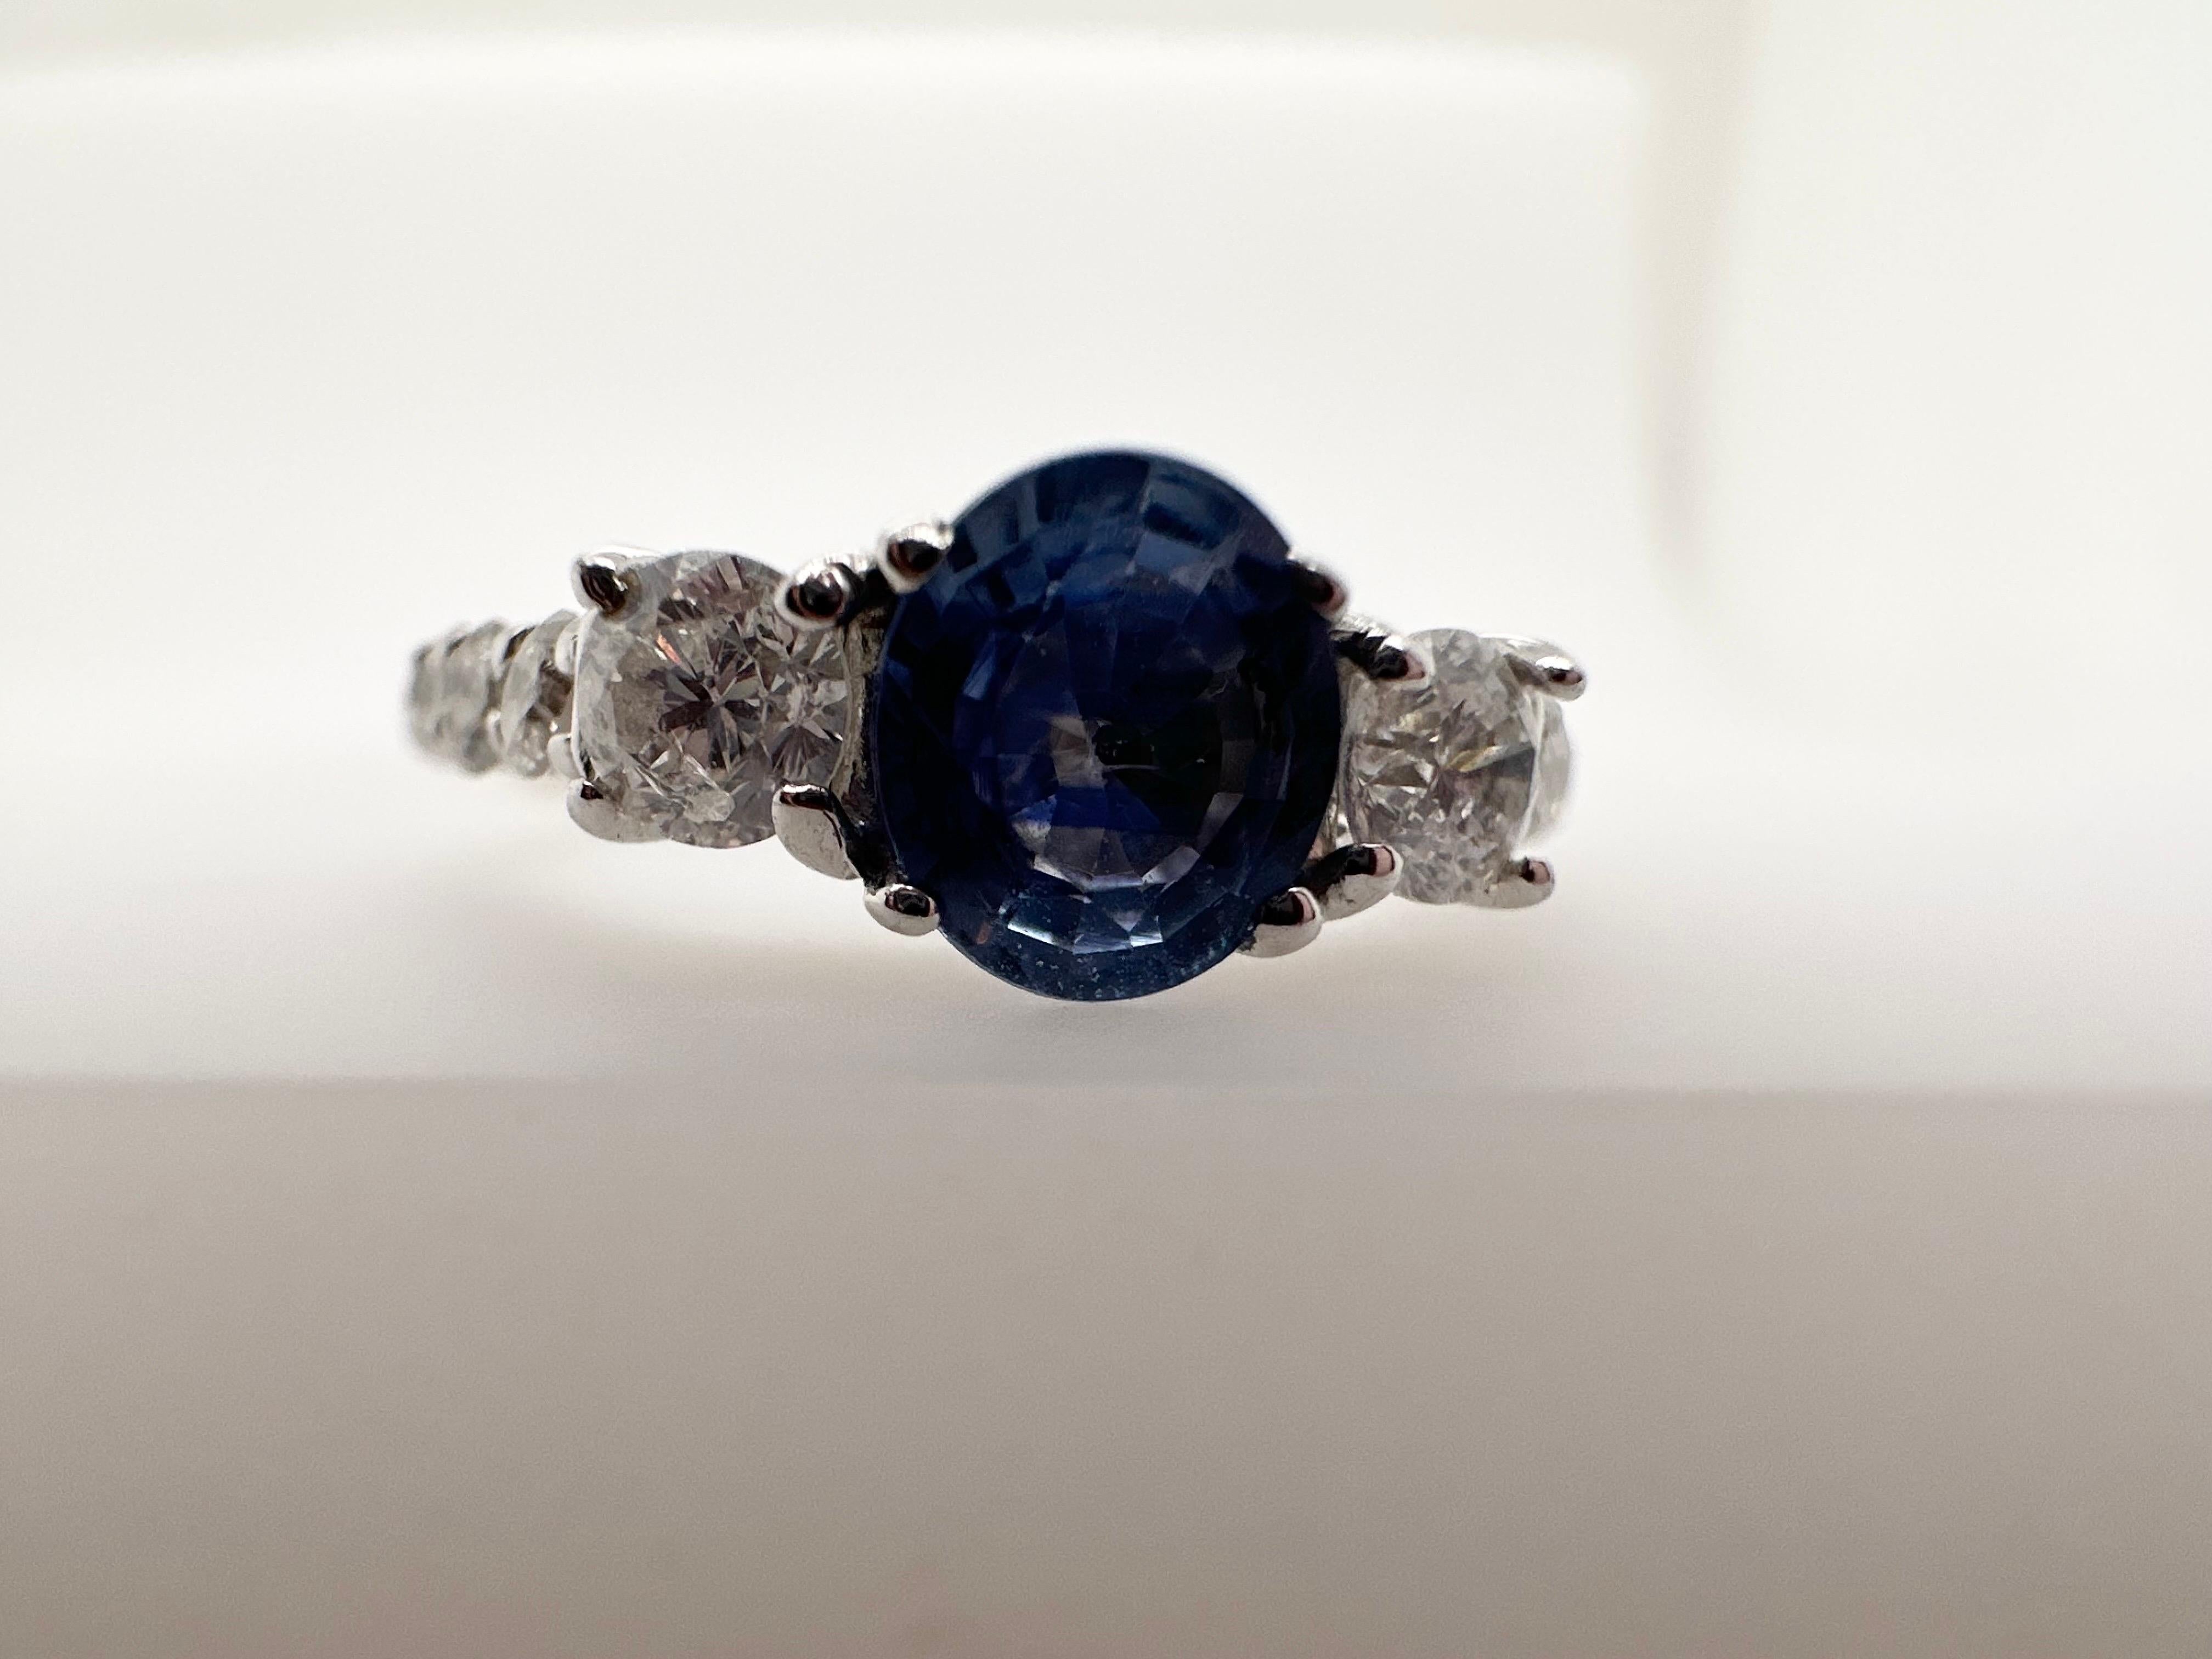 Ceylon sapphire engagement ring in 14KT white gold, stunning style called floating diamonds, the ring seems to show off the stones and minimize the appearance of gold which creates an illusion of floating gems and diamonds.

Metal Type: